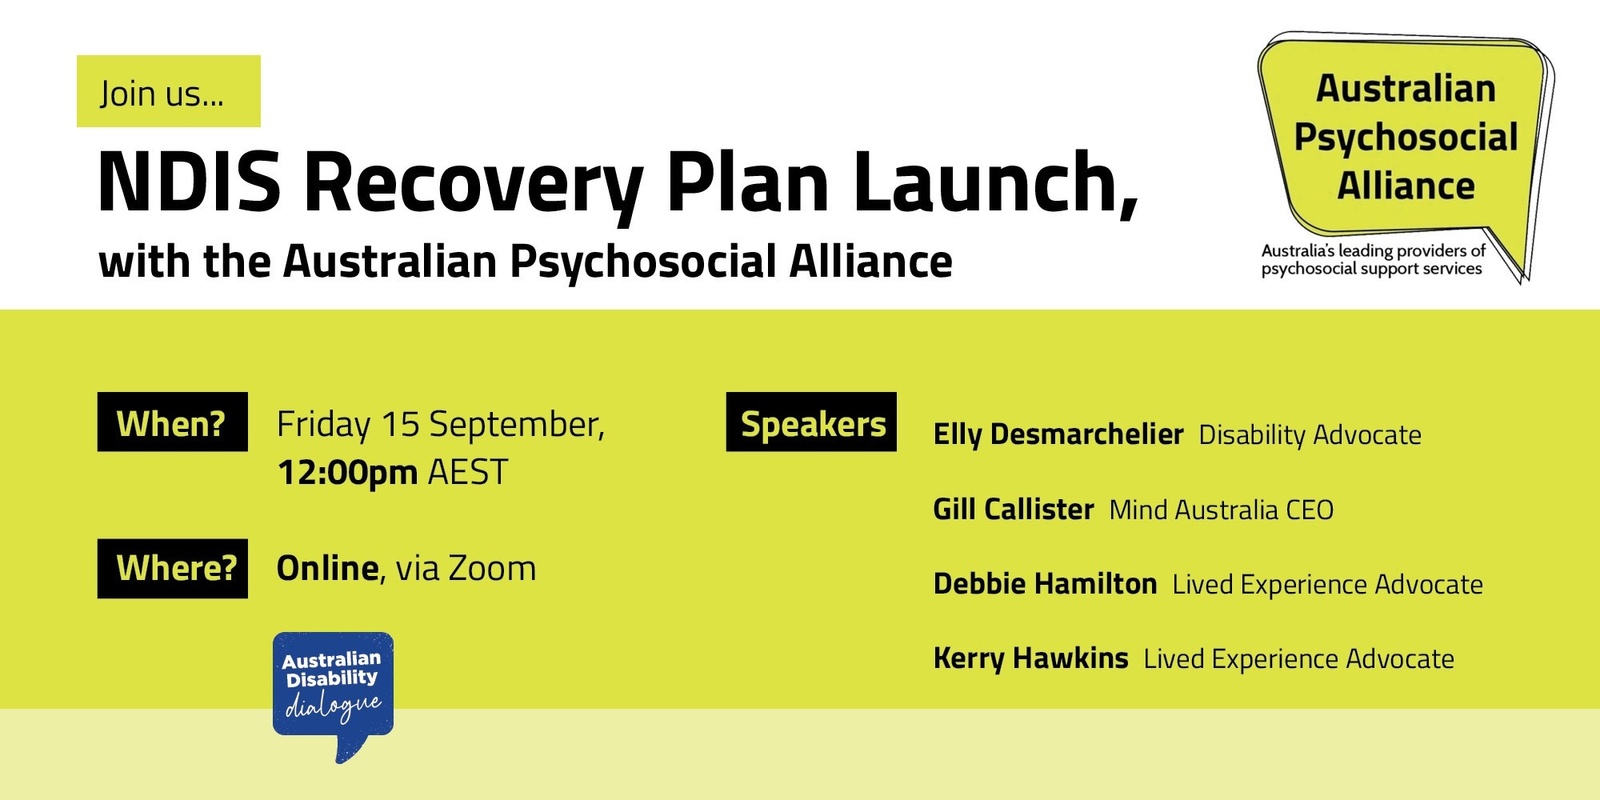 Banner image for The Australian Psychosocial Alliance's NDIS Recovery Plan launch 